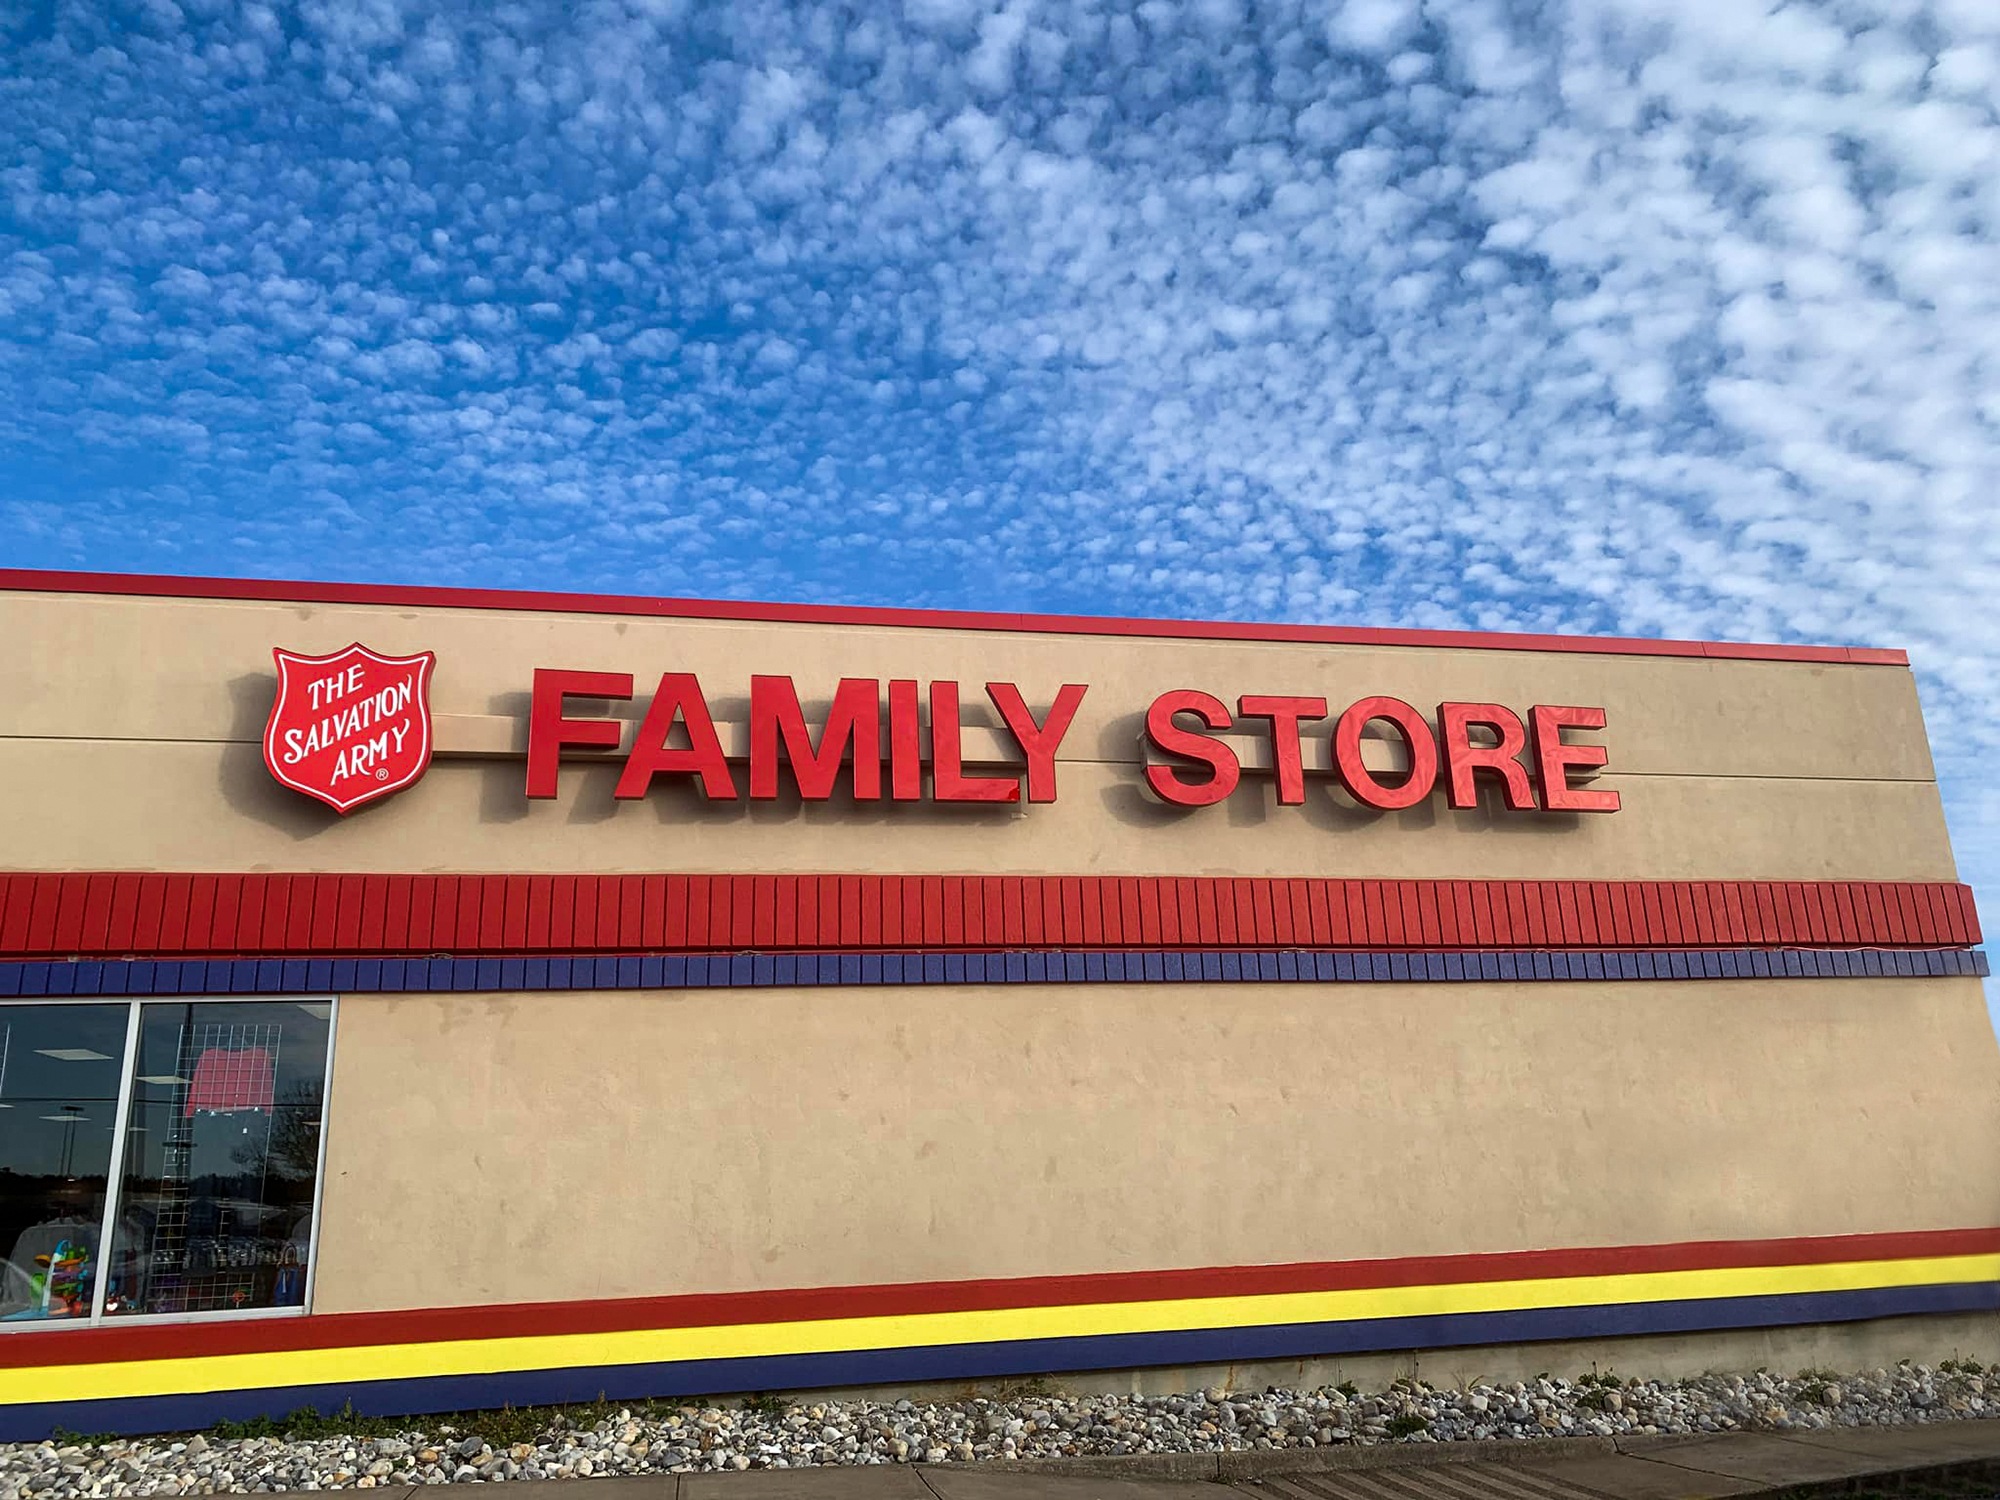 Internally Lighted Channel Letters for Salvation Army Family Store in Texarkana, Tx